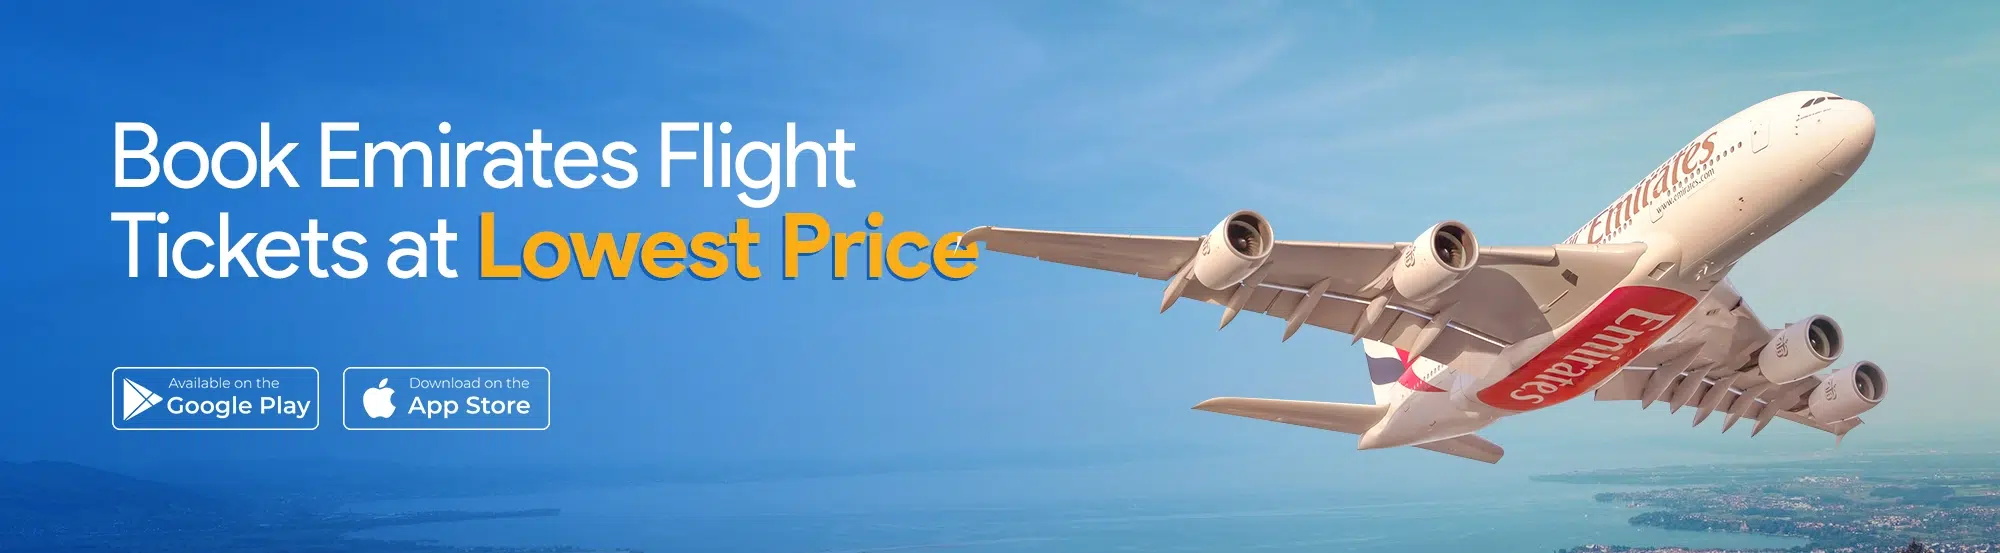 Book Emirates Flight Tickets at lowest Price